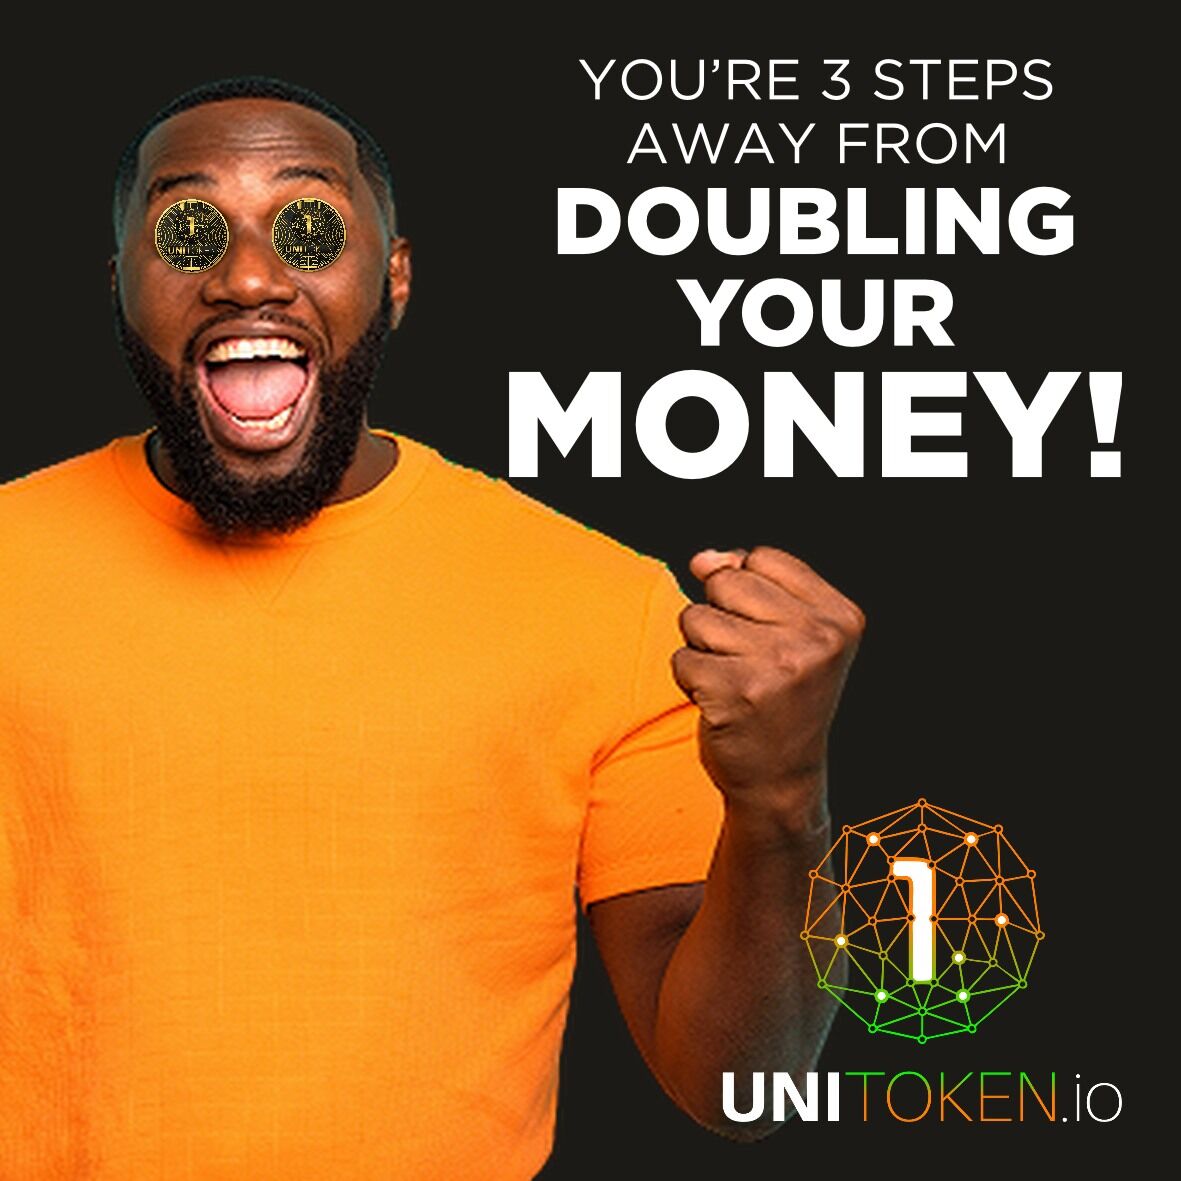 You're 3 steps away from DOUBLING YOUR MONEY! #UniToken #tokensale #residual #double #cryptocurrency #tokengiveaway #tokenlaunch